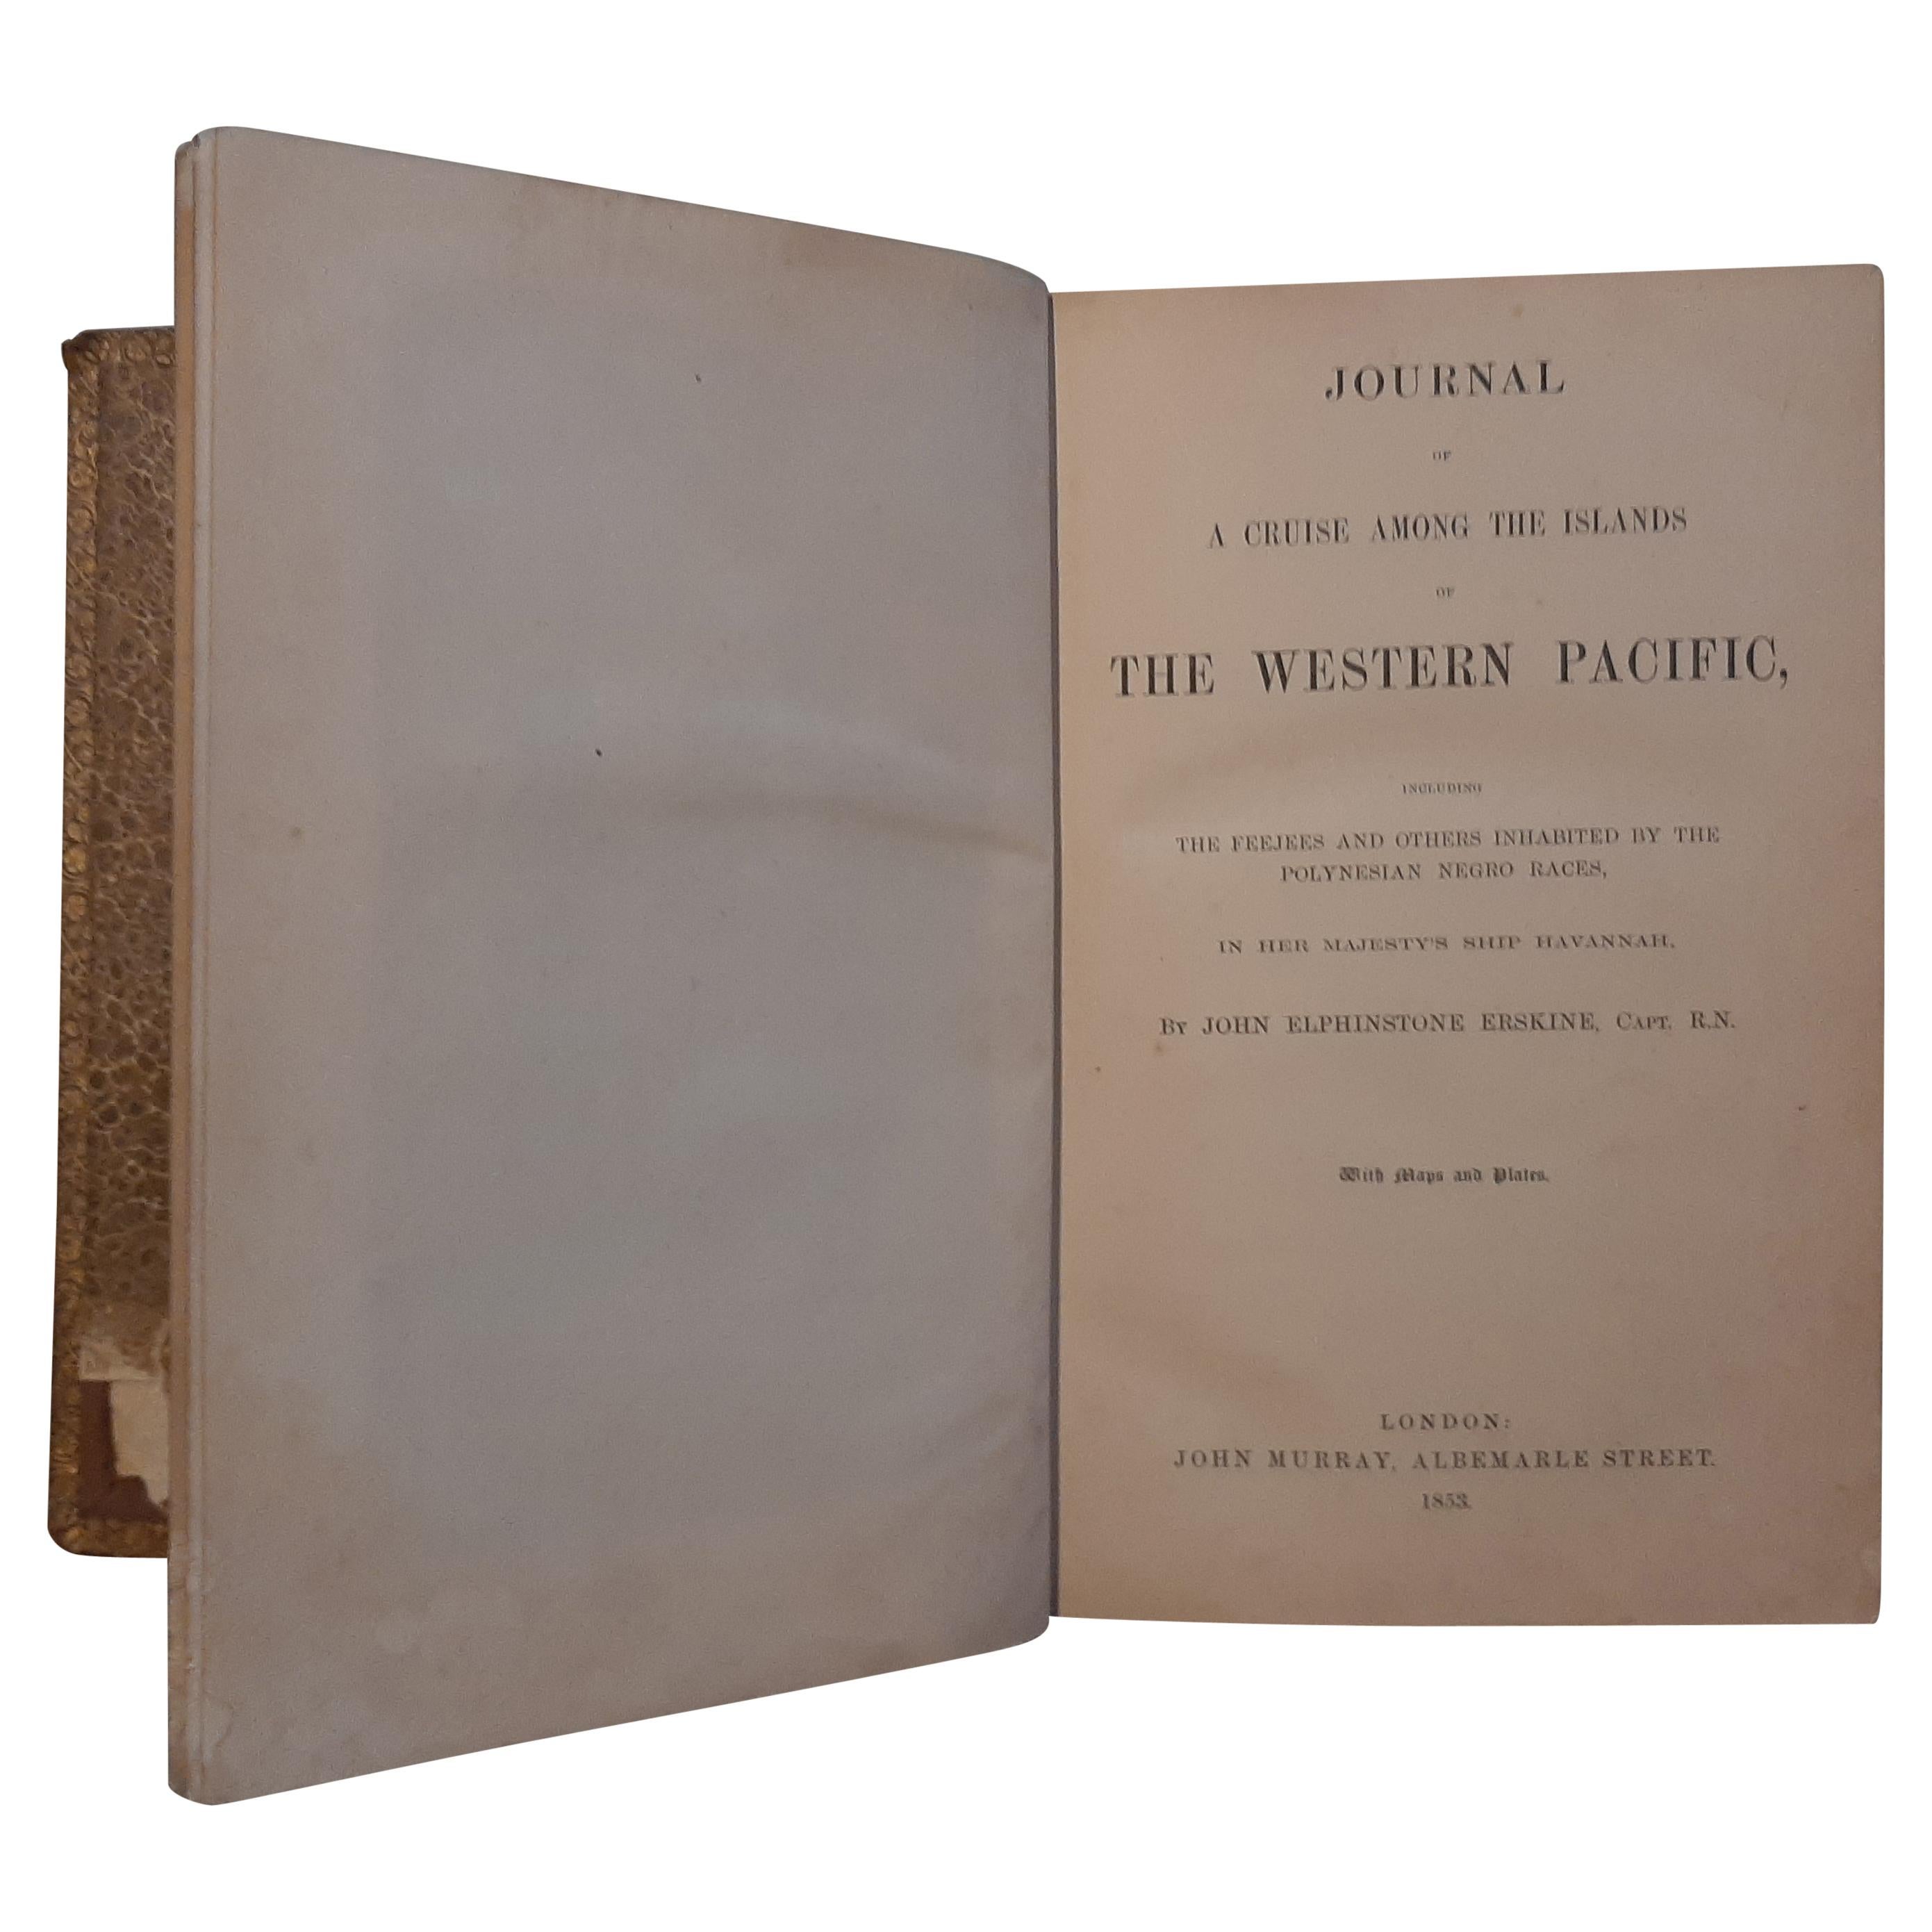 Journal of a Cruise among the Islands of the Western Pacific '1853'